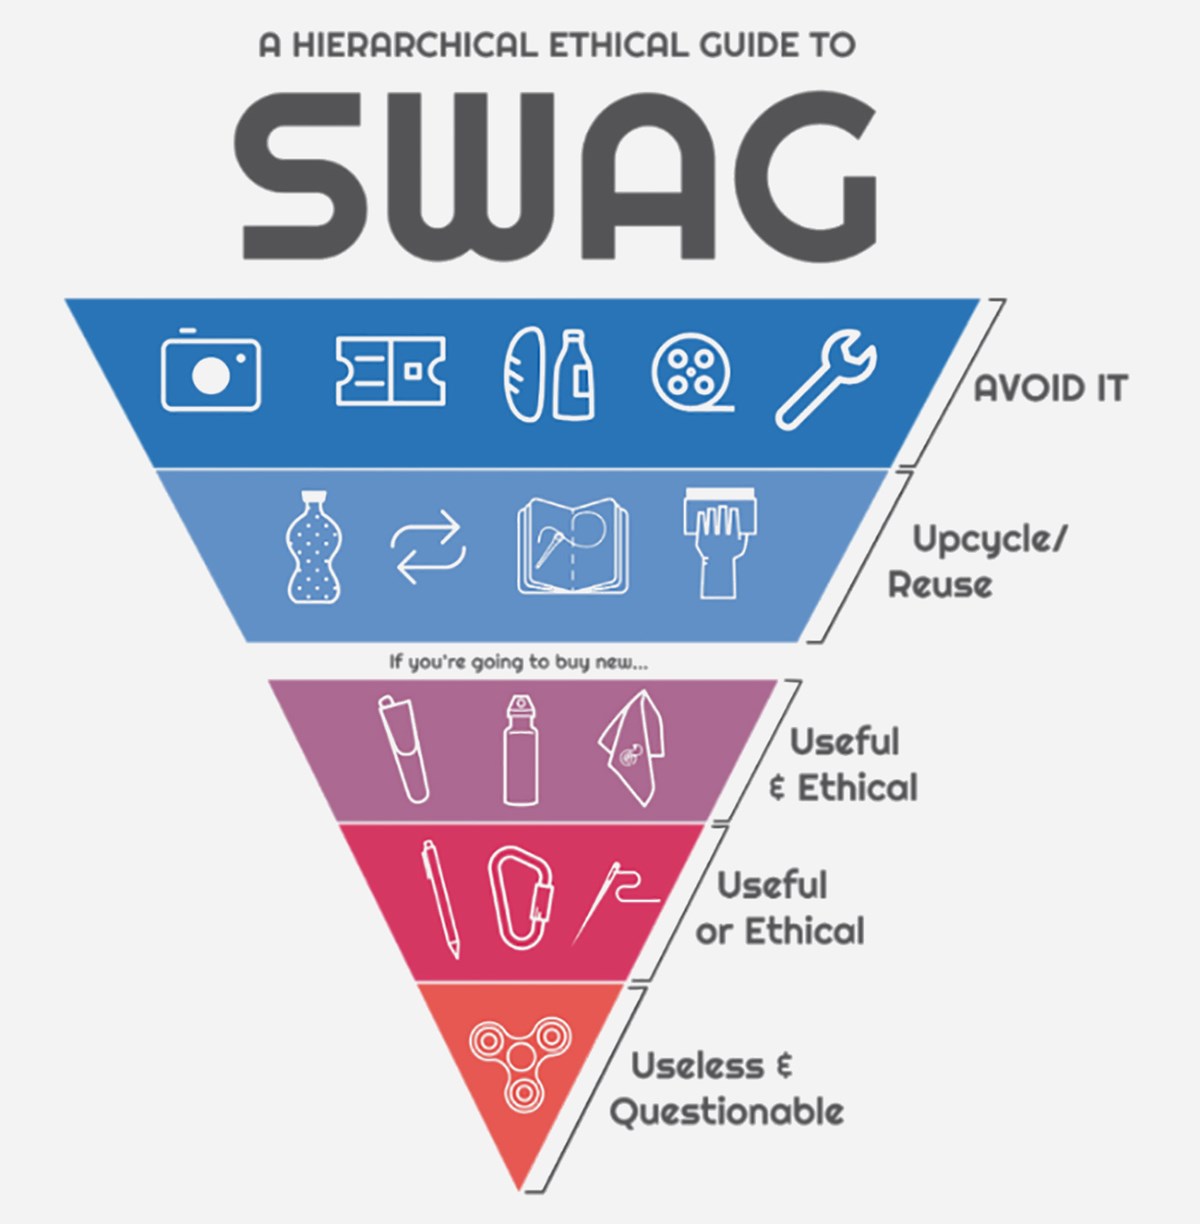 GRAPHIC: Hierarchical Ethical Guide to Swag. UMass Lowell partners with the Post-Landfill Action Network, a nonprofit that assists large organizations in the overall reduction of waste. Following the diagram, UMass Lowell’s recommendation is to remain in the top three segments of the inverted pyramid. AVOID IT Try experiences instead such as photo booths, event tickets, food, movie screenings, repair stations and more. The options are endless!  UPCYCLE / REUSE Consider options that don't require buying new such as decorating water bottles, clothing swaps, zines or book binding from reused paper, or screen printing items students already own.  USEFUL & ETHICAL If you must purchase new, consider products that students will actually use, are durable, and come from trusted, ethical sources. We recommend checking out some PLAN'S discounts on brands such as To-Go Ware, Klean Kanteen, People Towels and more.  USEFUL OR ETHICAL We understand that you can't always find affordable useful and ethical swag. At least try to buy one or the other! Useful items can include durable ballpoint pens, carabiners or sewing kits. There may be other swag options which are less useful but come from ethical sources. We recommend using these options as a last resort.  USELESS & QUESTIONABLE Please avoid buying useless swag from questionable retailers. This can include items such as fidget spinners, slap bracelets and so much more.